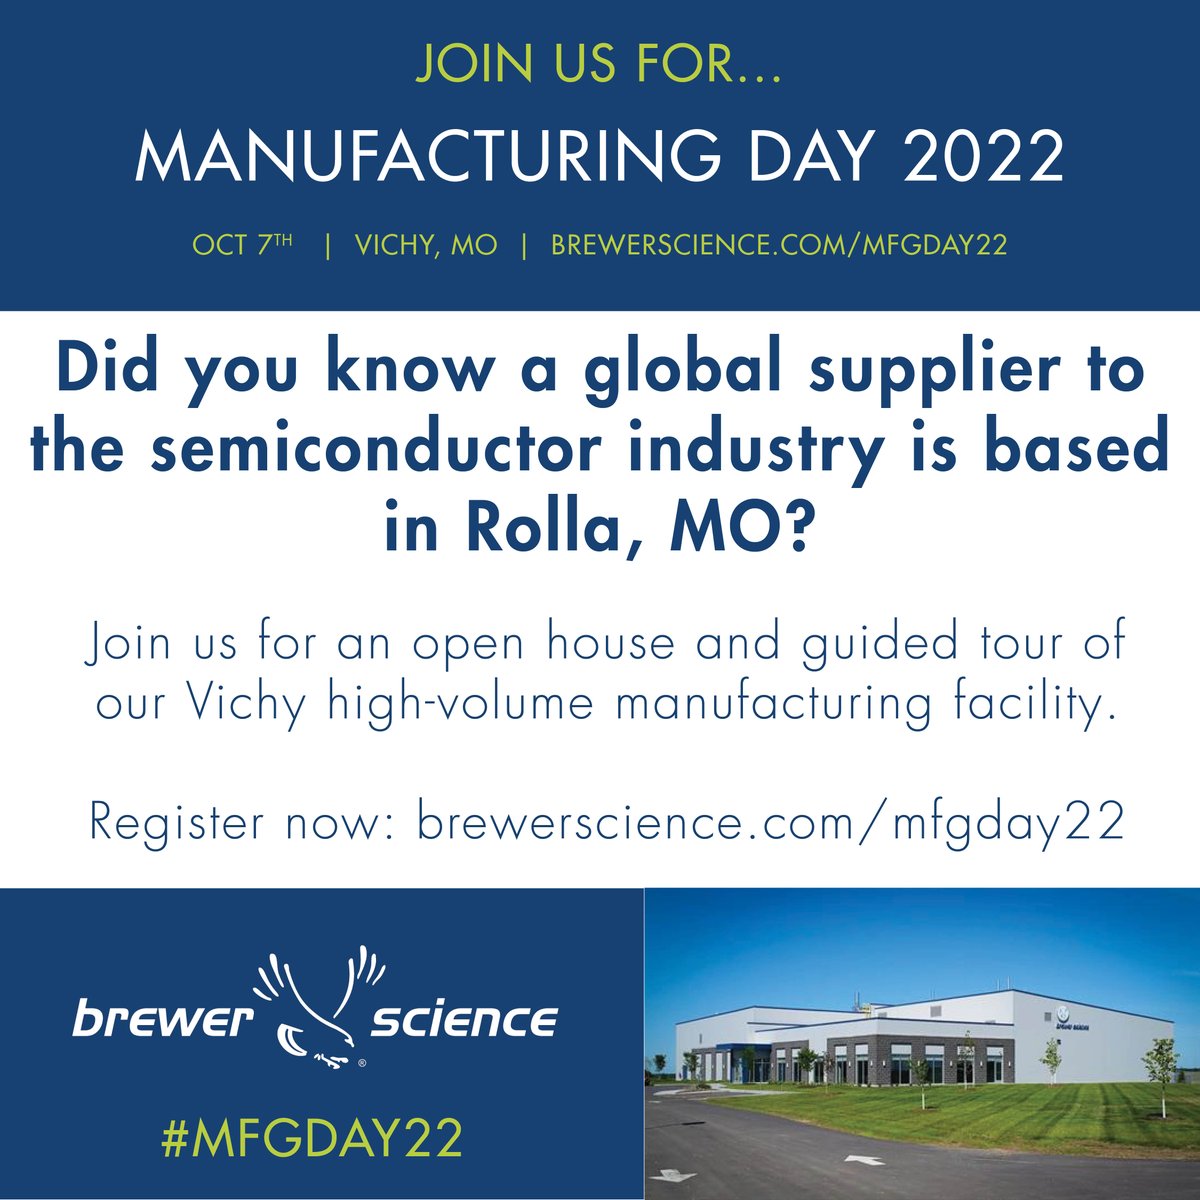 test Twitter Media - Did you know a global supplier to the semiconductor industry is based right here in #RollaMO?  We celebrate #MFGDay22 with an open house and guided tours of our Vichy high-volume manufacturing facility, October 7th. Register for your tour time: https://t.co/jjkImKbb7p https://t.co/zUI9ezZn4m